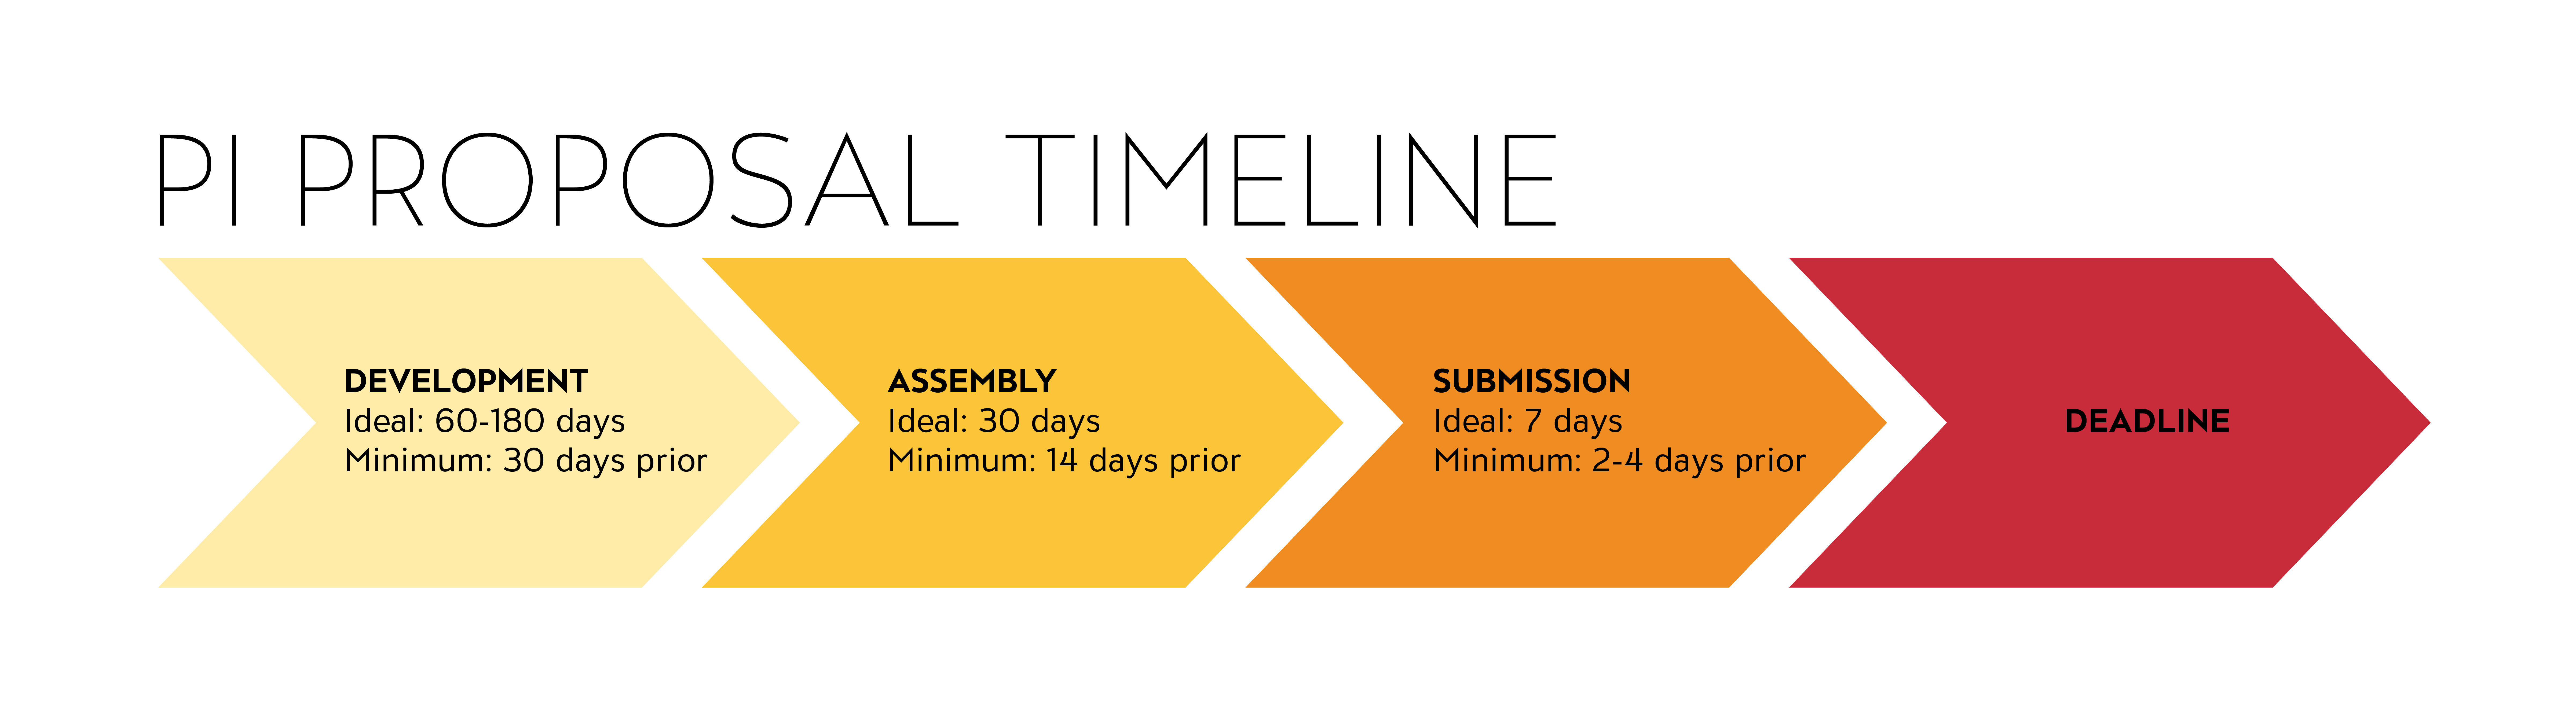 timelines for research proposal